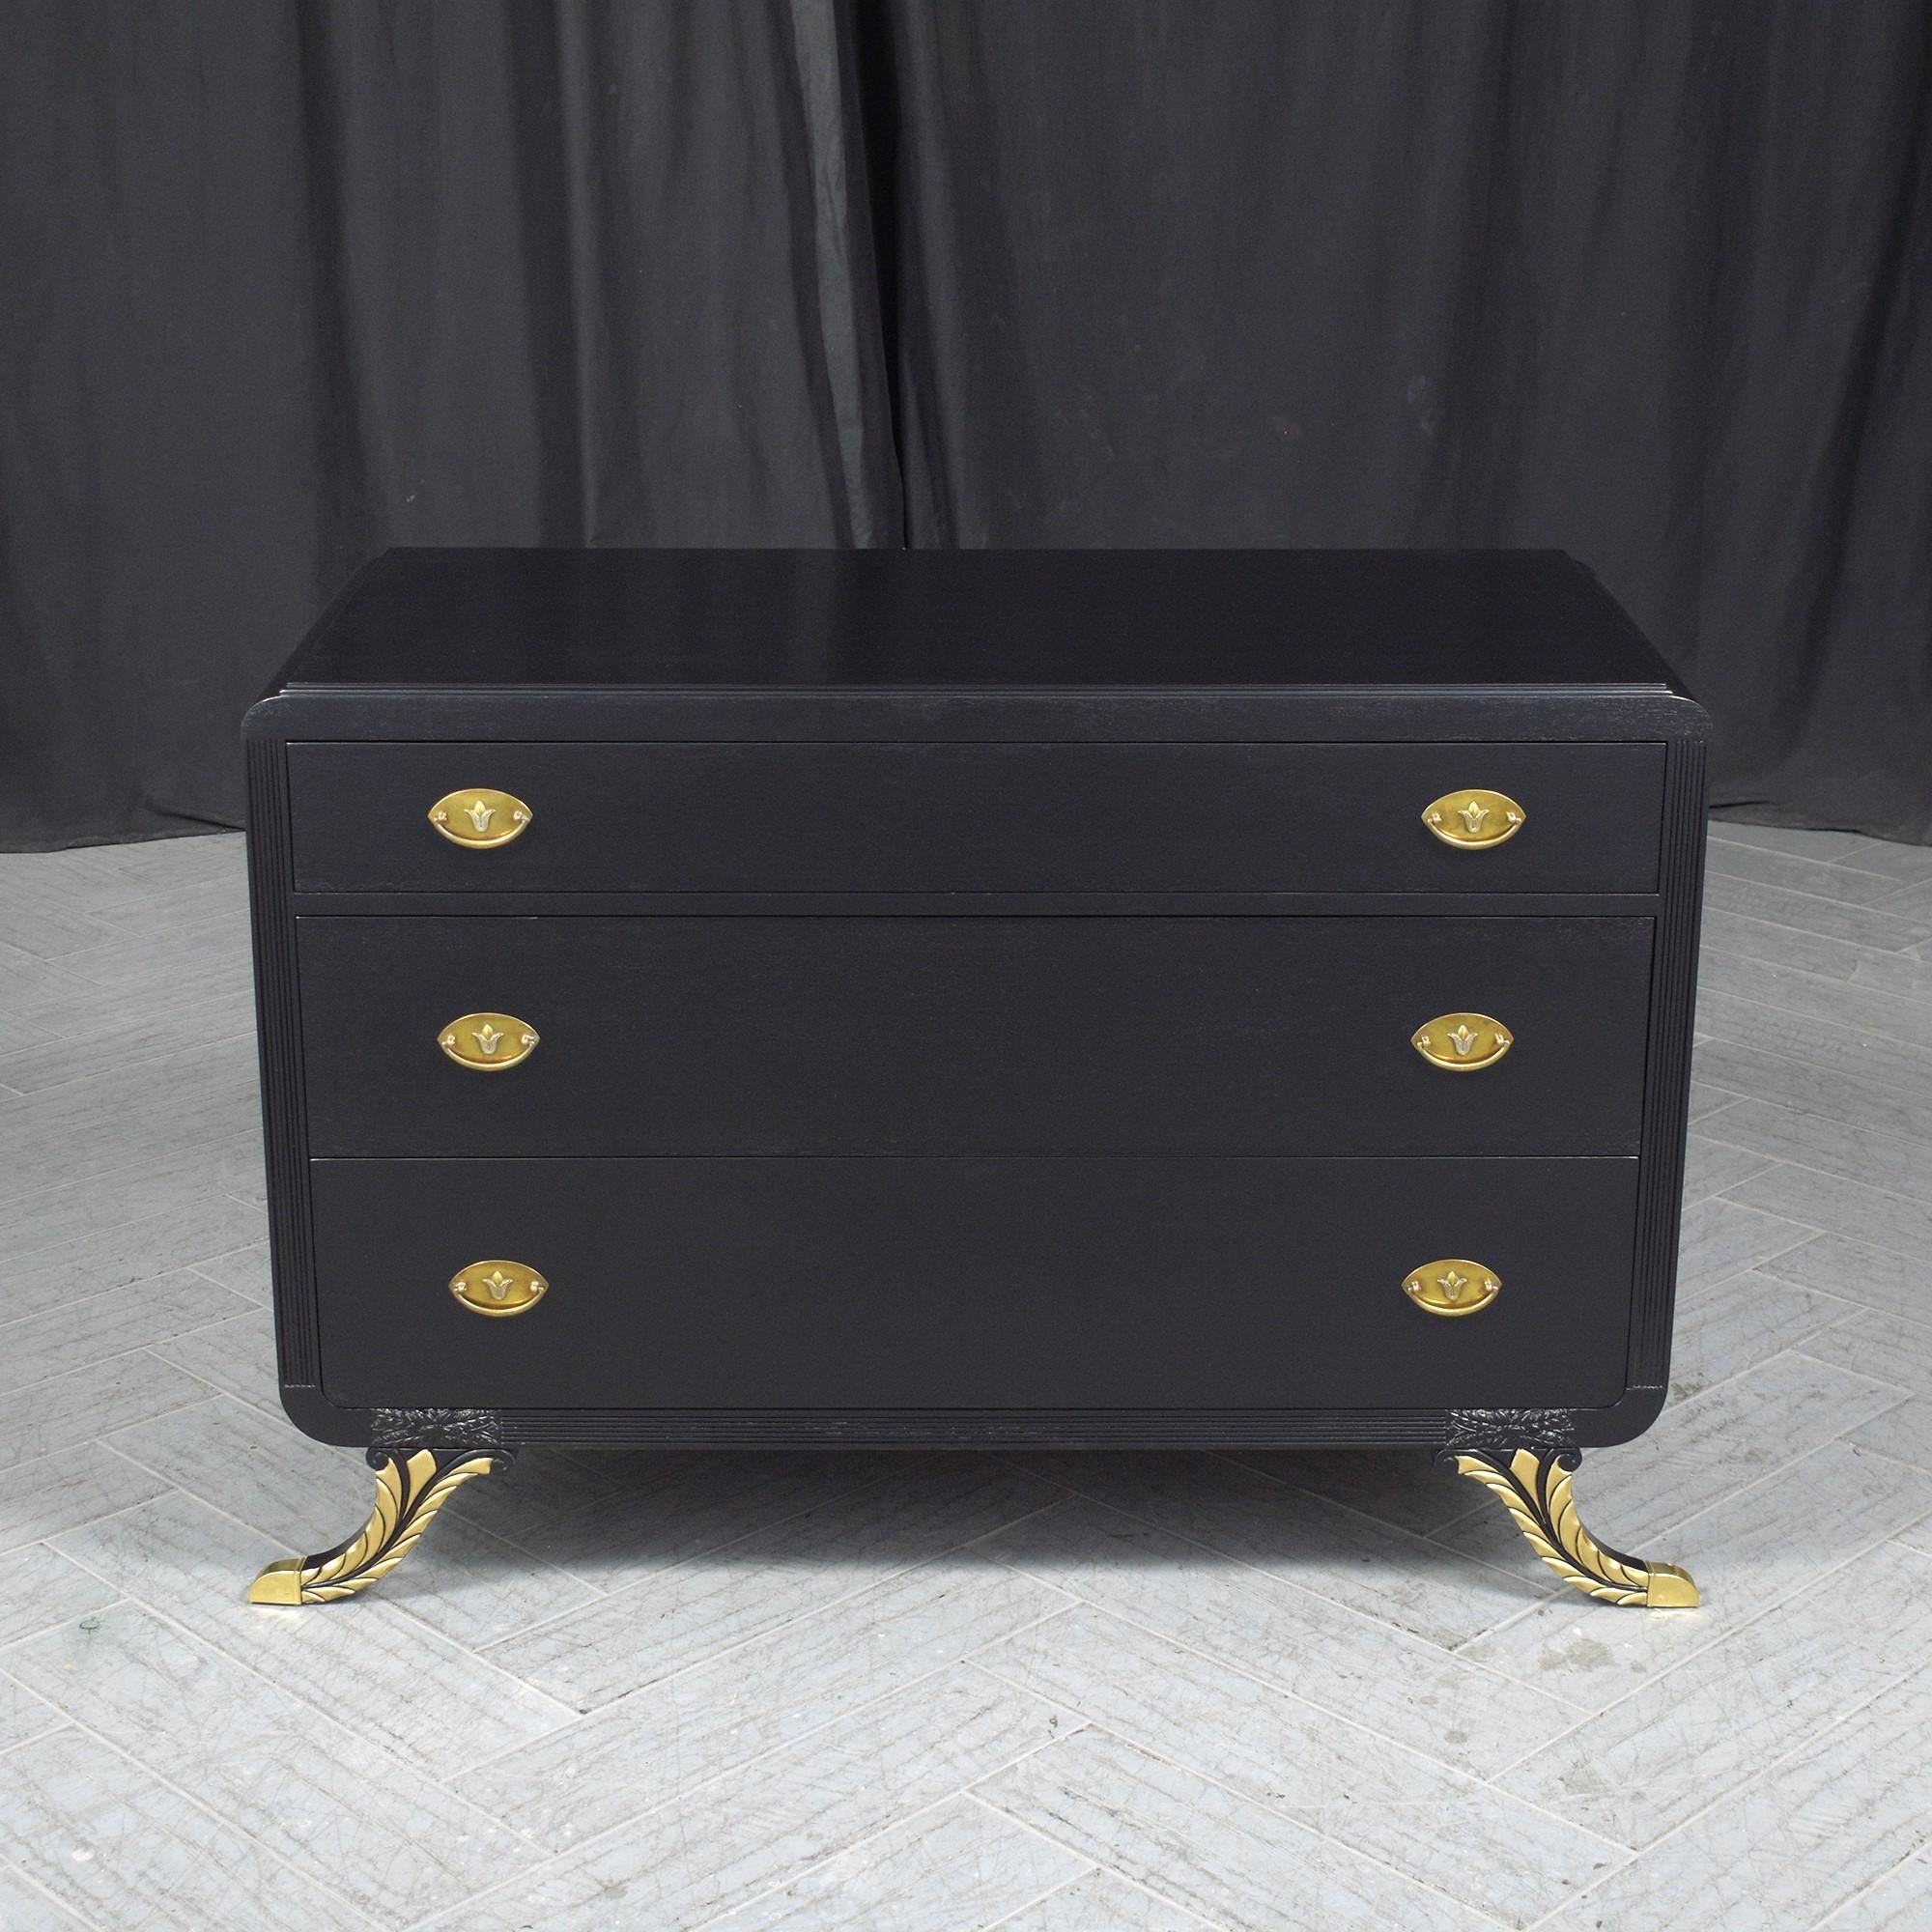 Immerse yourself in the timeless elegance of our antique empire dresser, a masterpiece of craftsmanship and style brought back to life by our skilled artisans. Crafted from rich mahogany, this chest of drawers now boasts a striking ebonized color, a